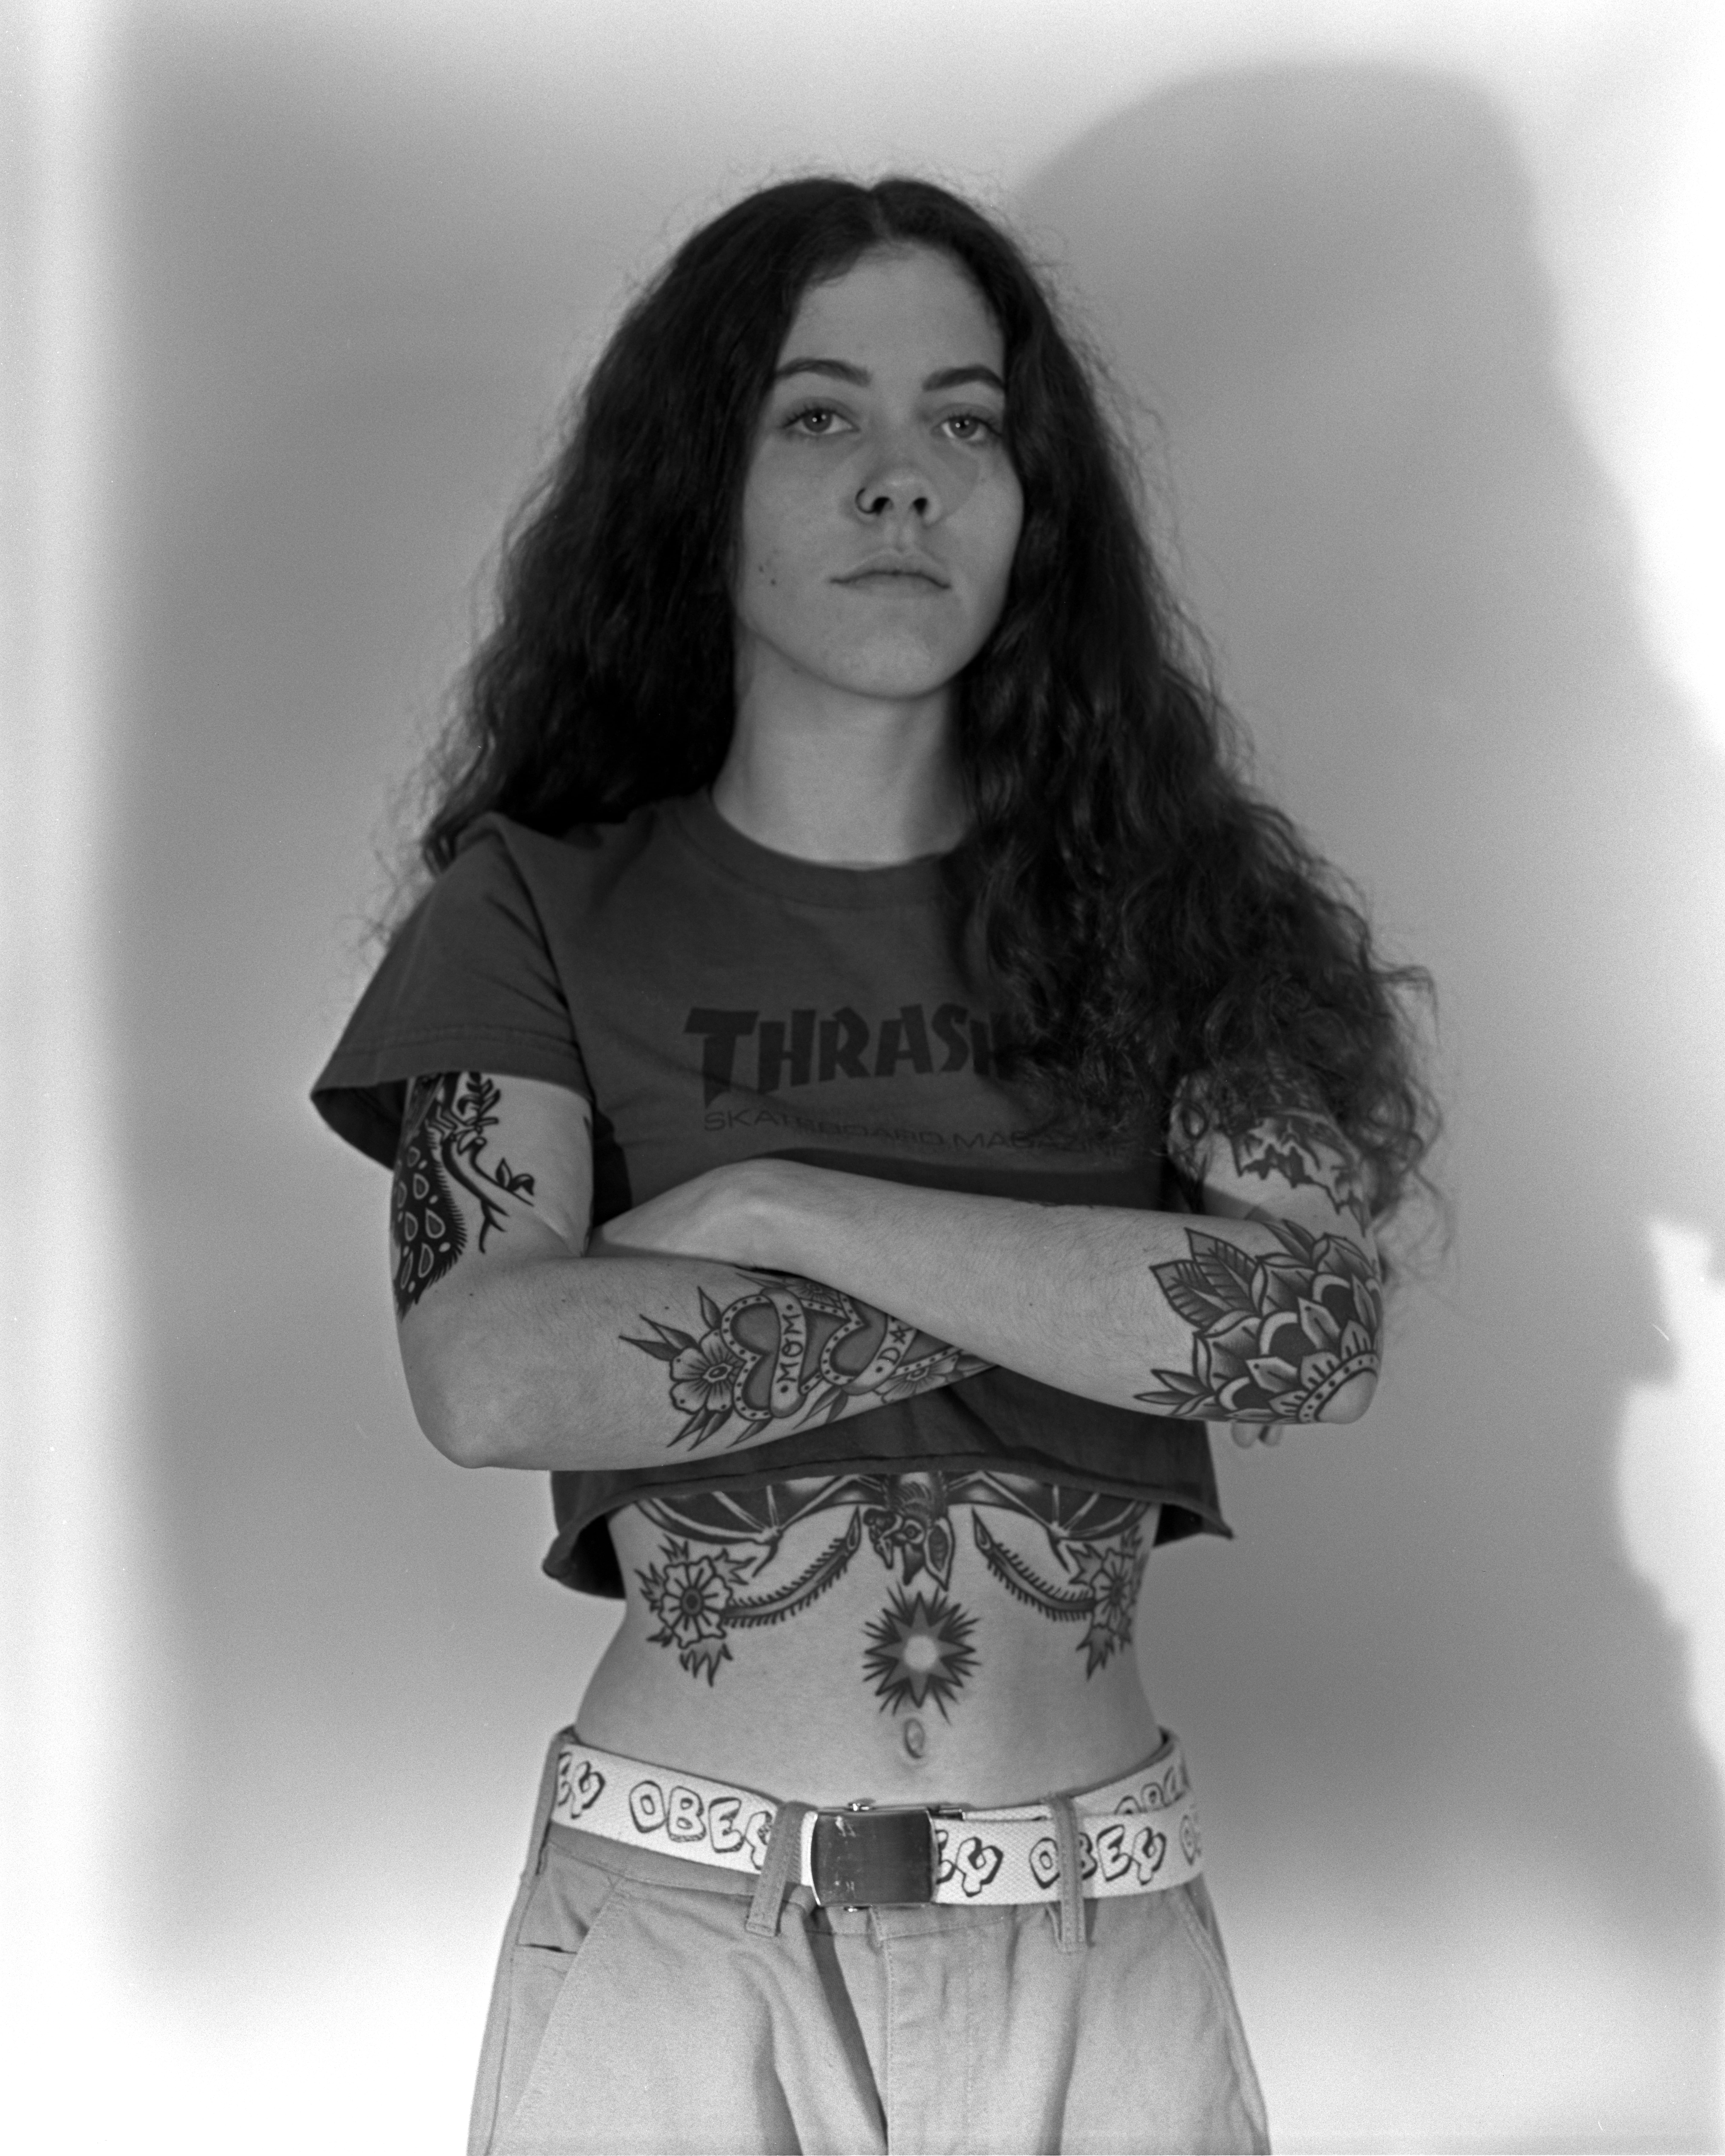 A person with tattoos facing the camera with arms crossed.